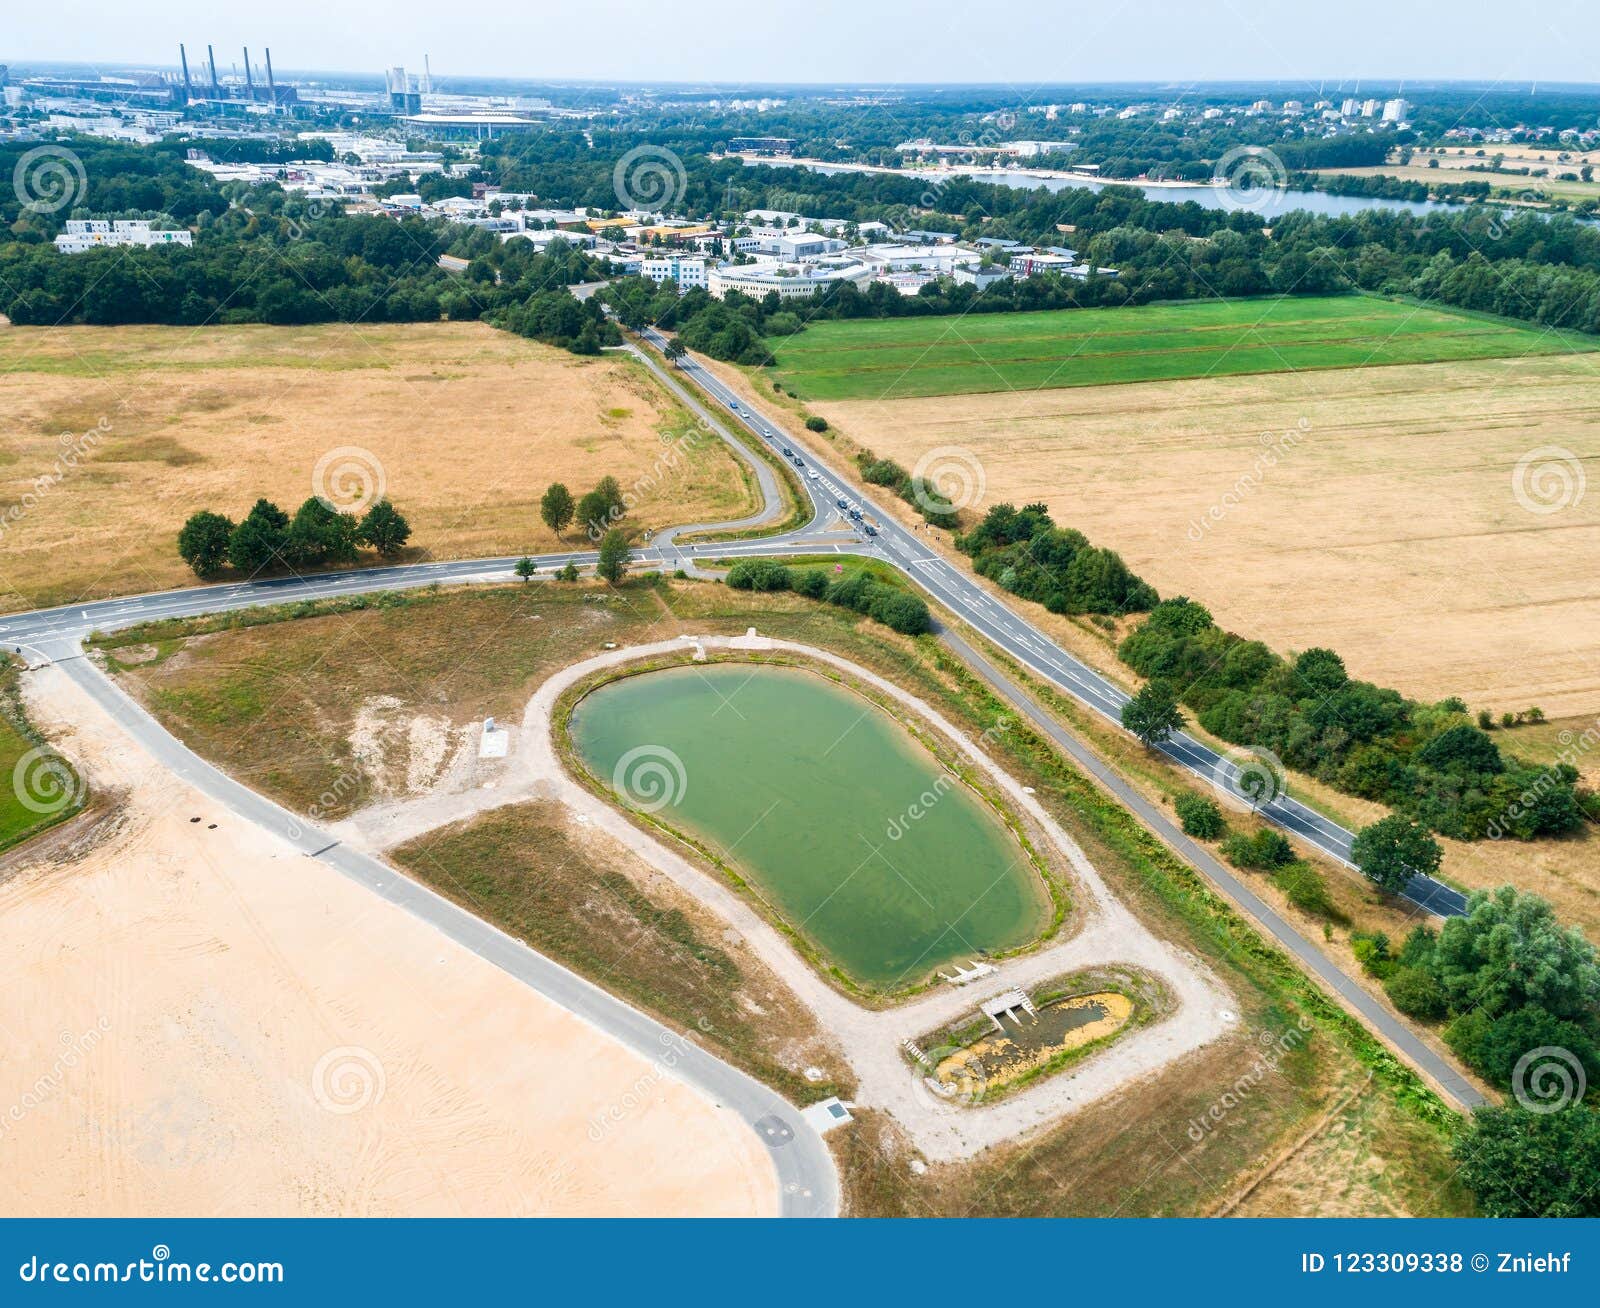 aerial view of a rain retention basin at the edge of a new development, taken oblique